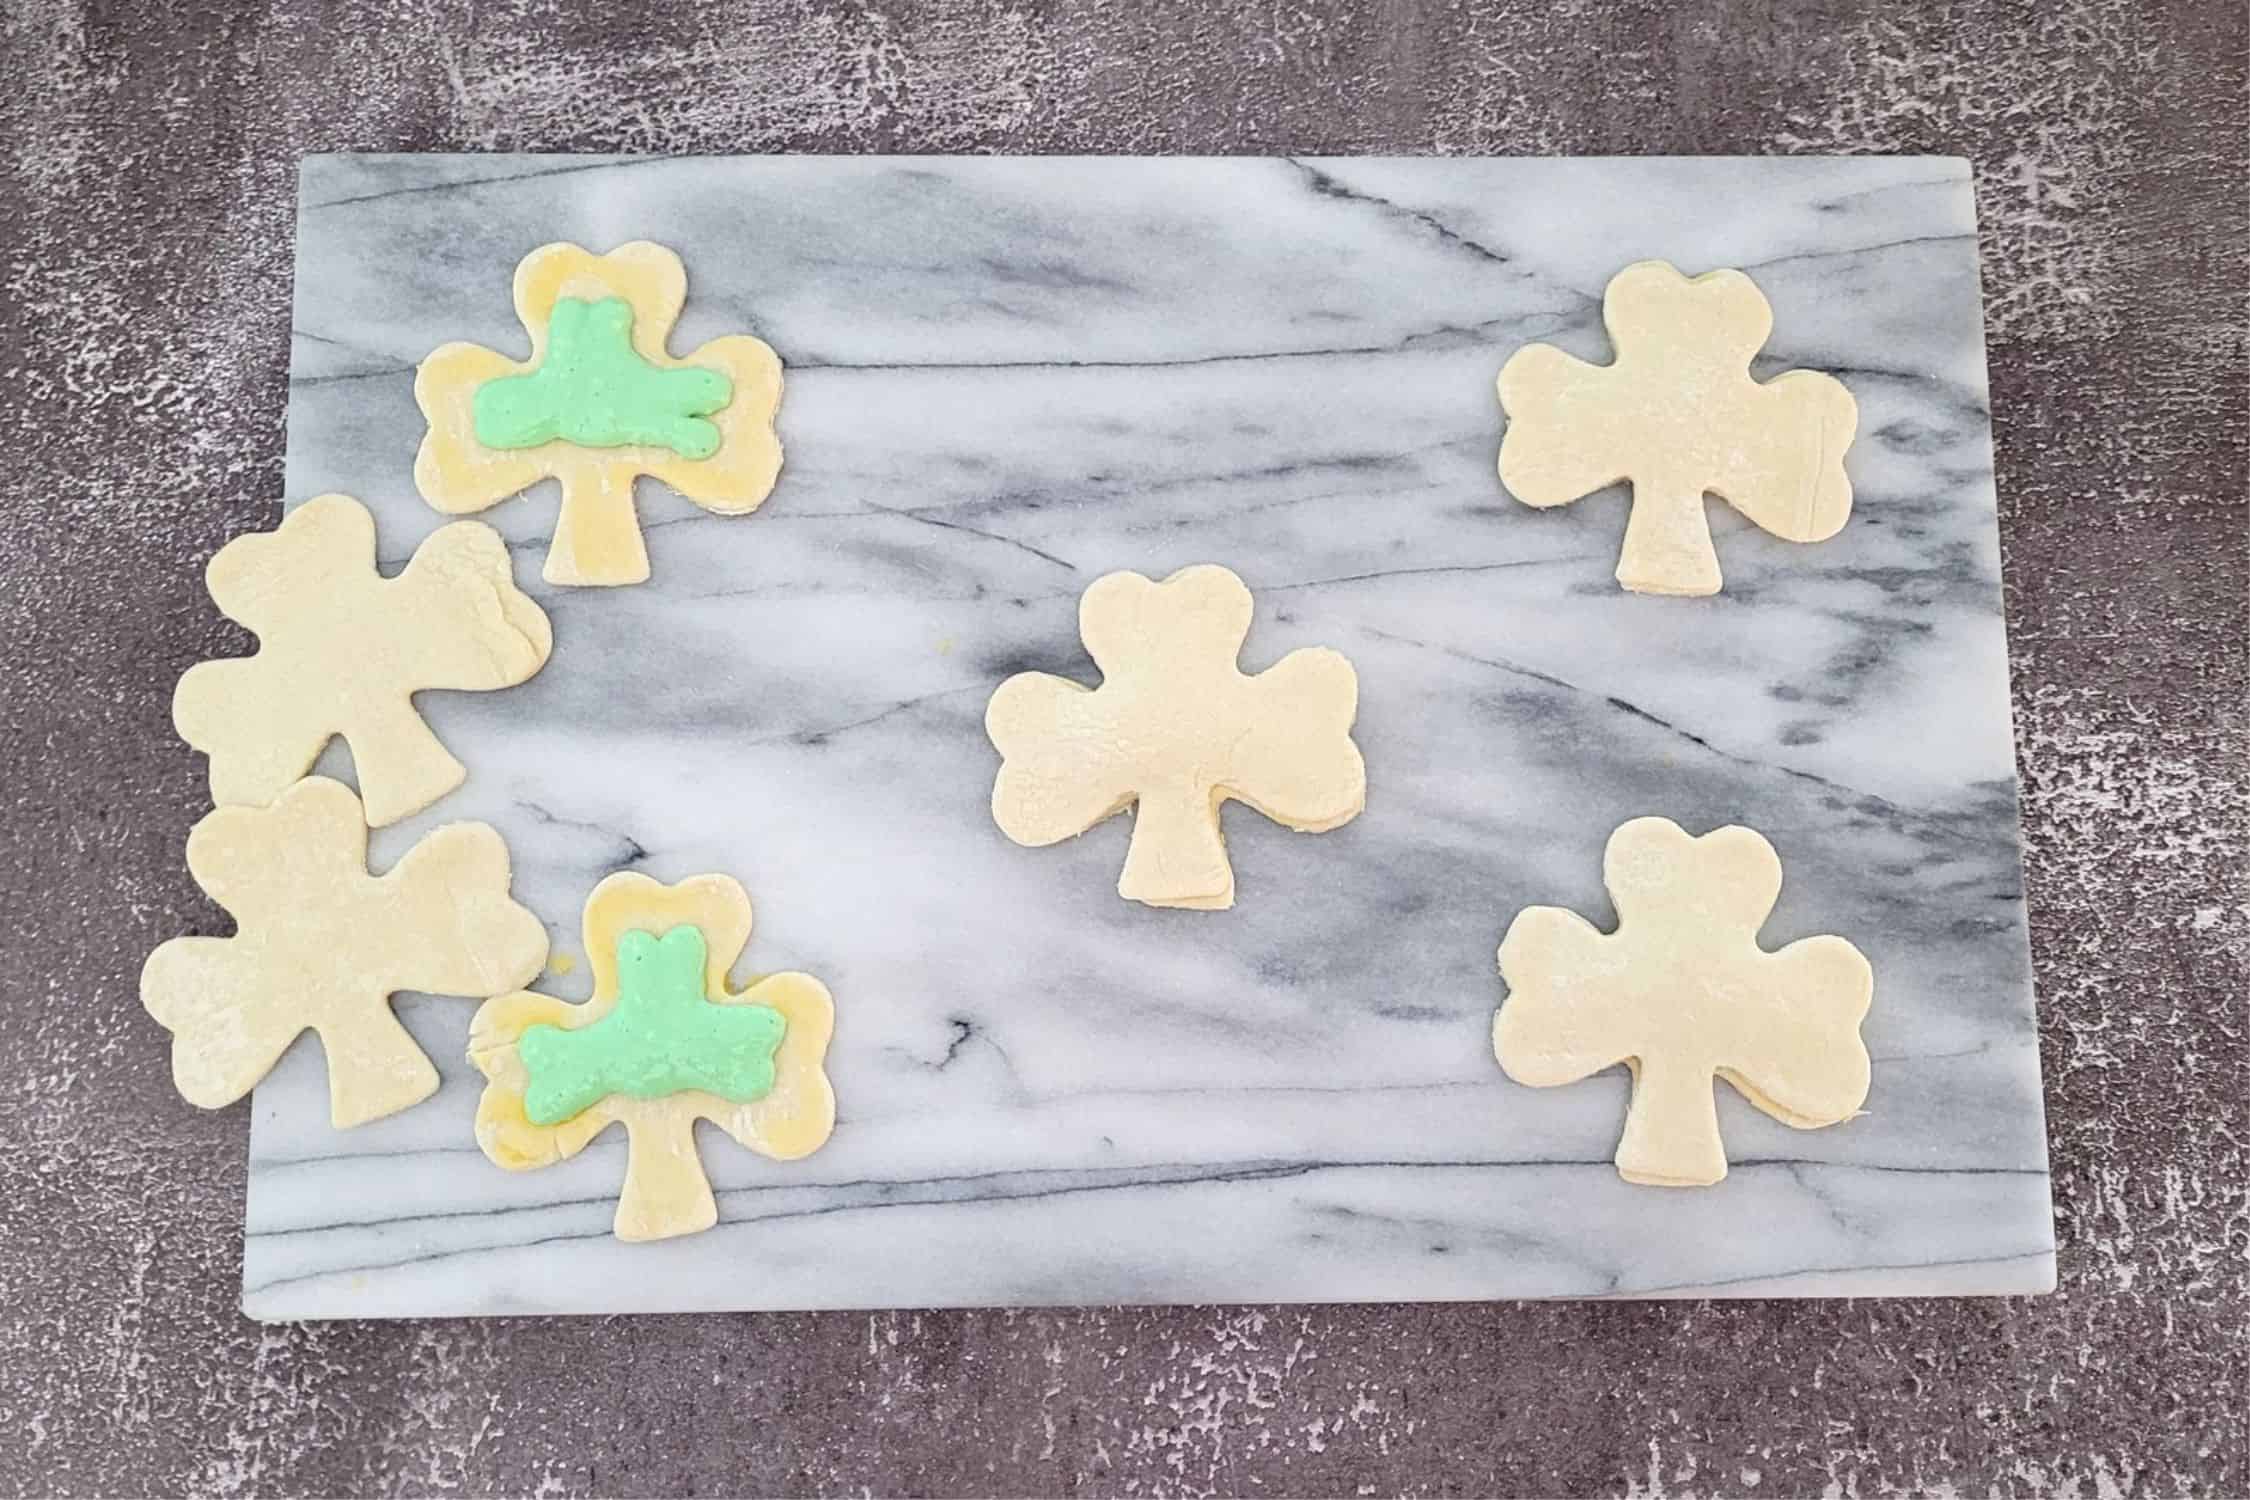 placing the top dough on each shamrock with filling